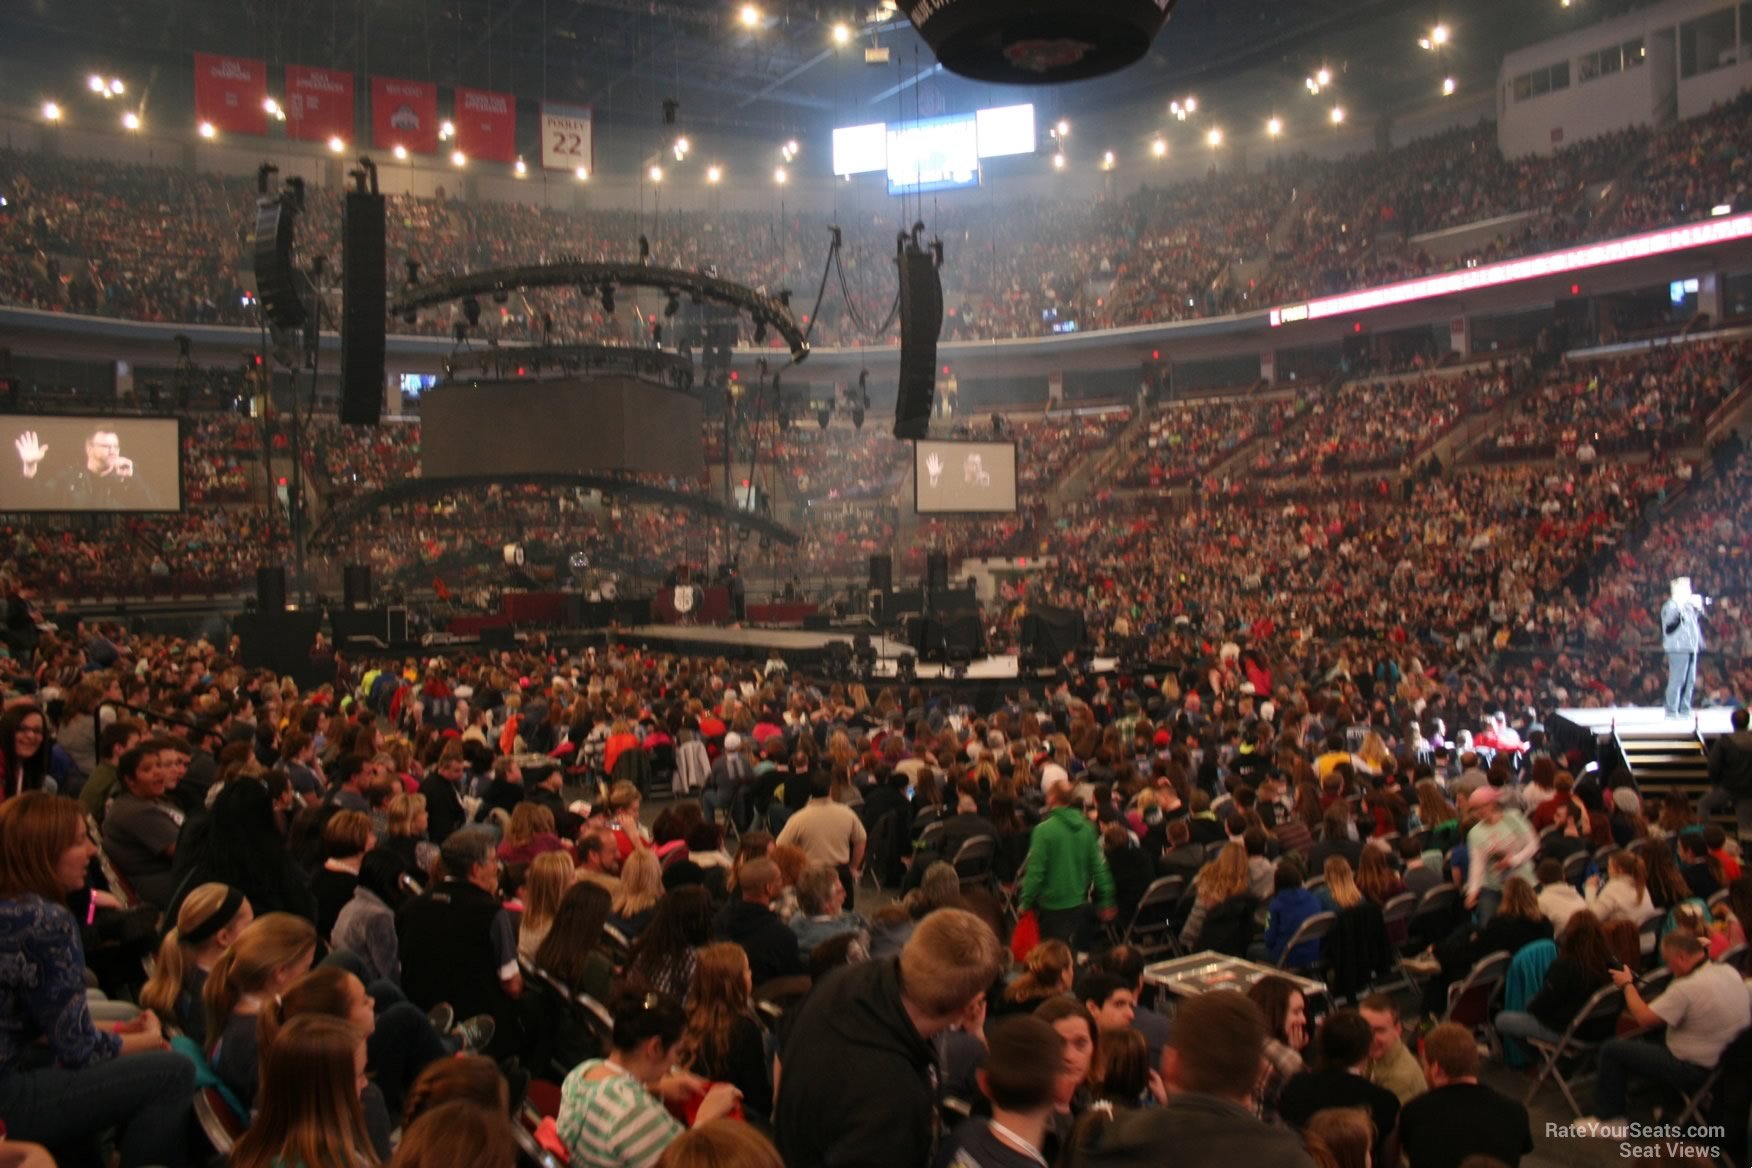 section 104, row h seat view  for concert - schottenstein center